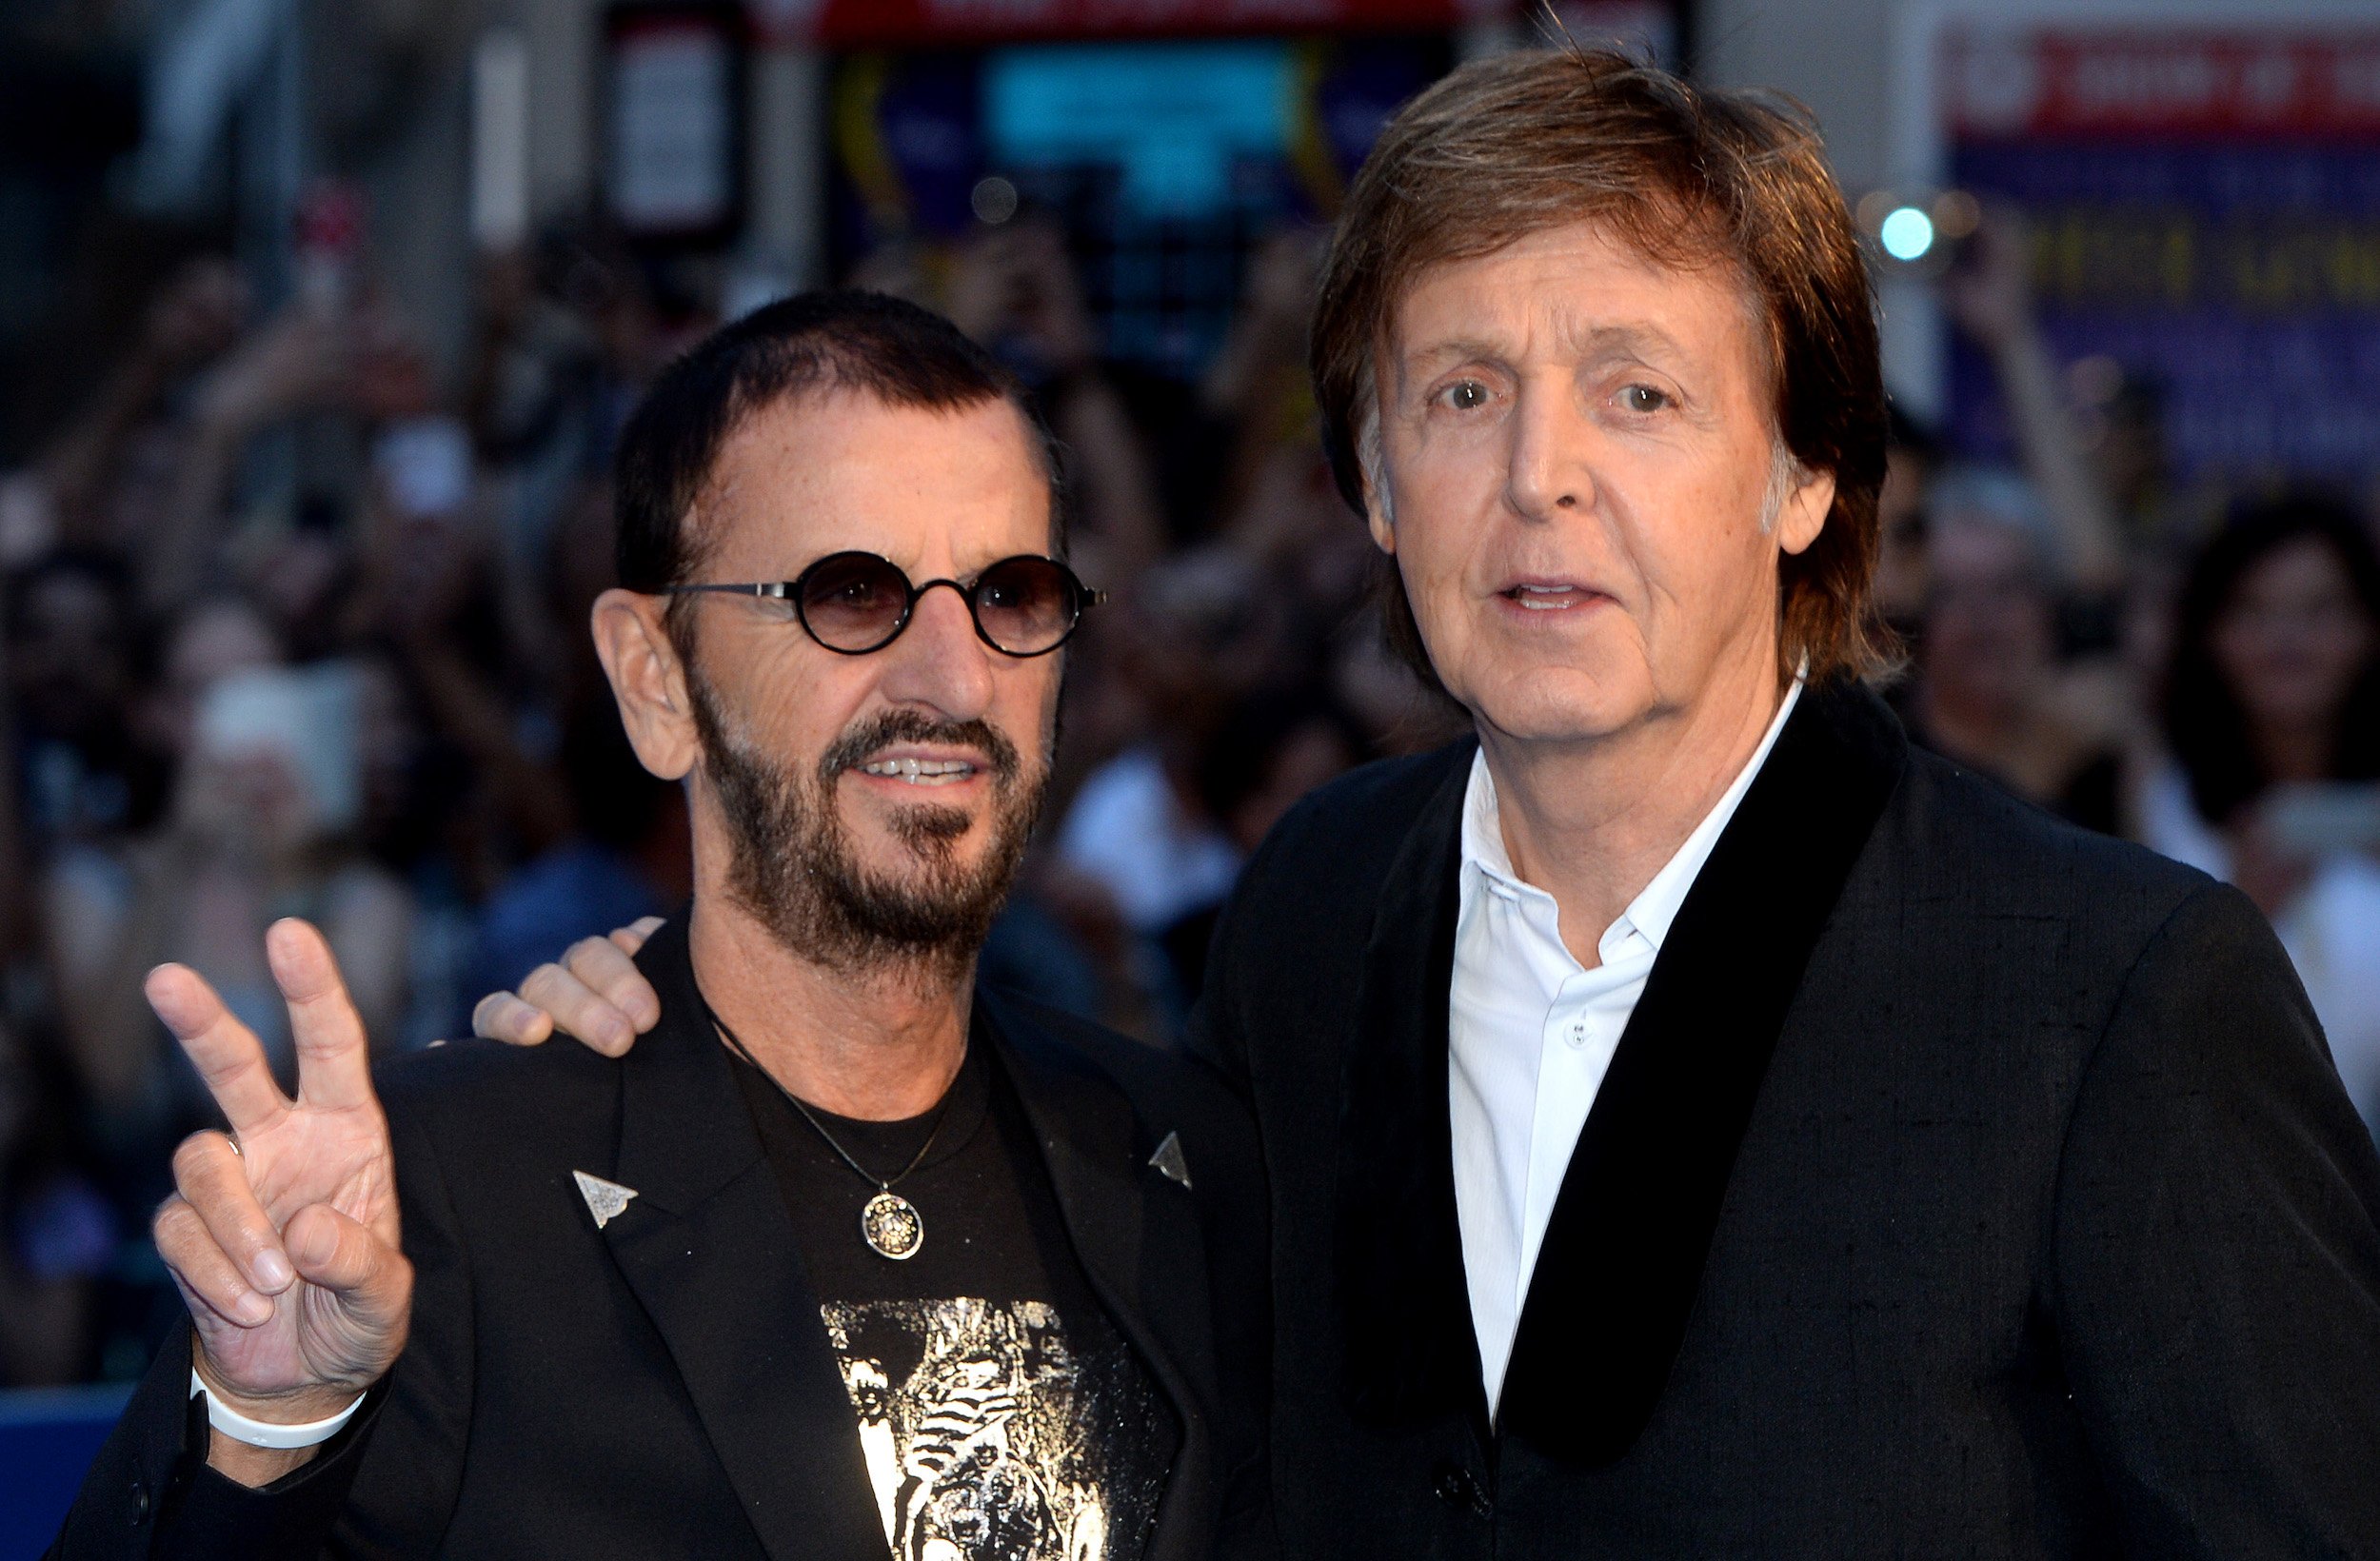 Ringo Starr and Paul McCartney attend the premiere of 'The Beatles: Eight Days A Week - The Touring Years' in London, England